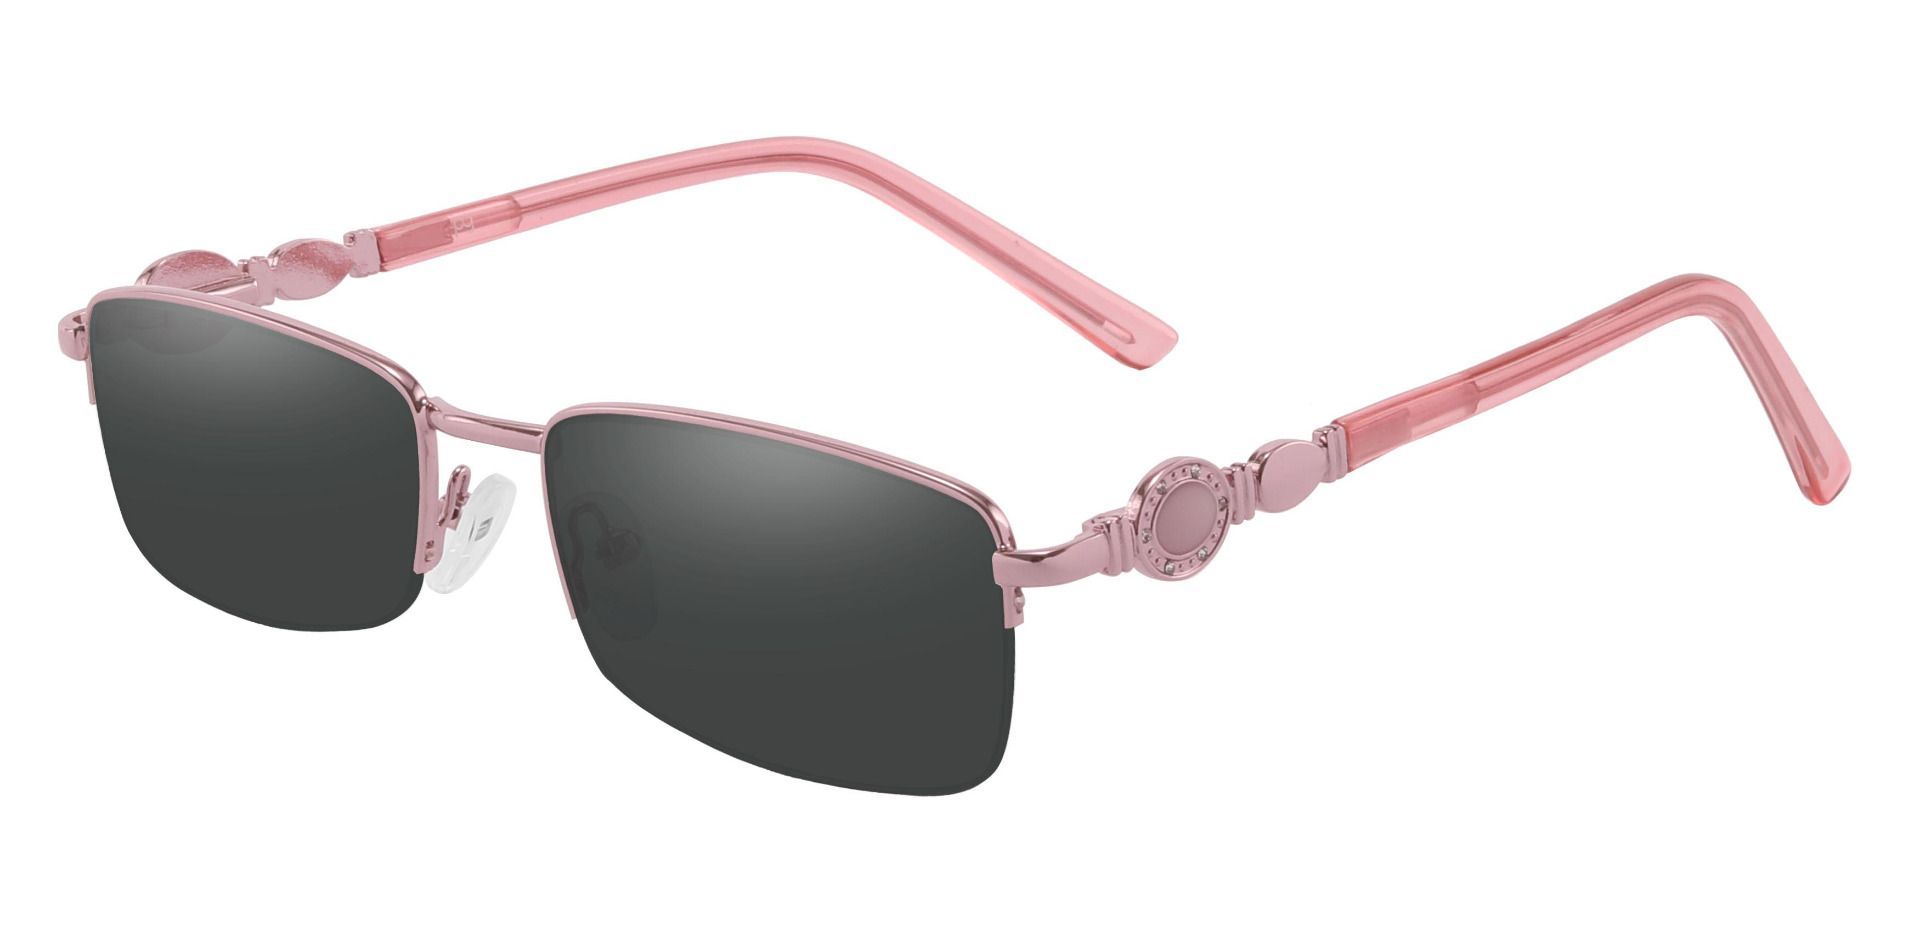 Crowley Rectangle Reading Sunglasses - Pink Frame With Gray Lenses